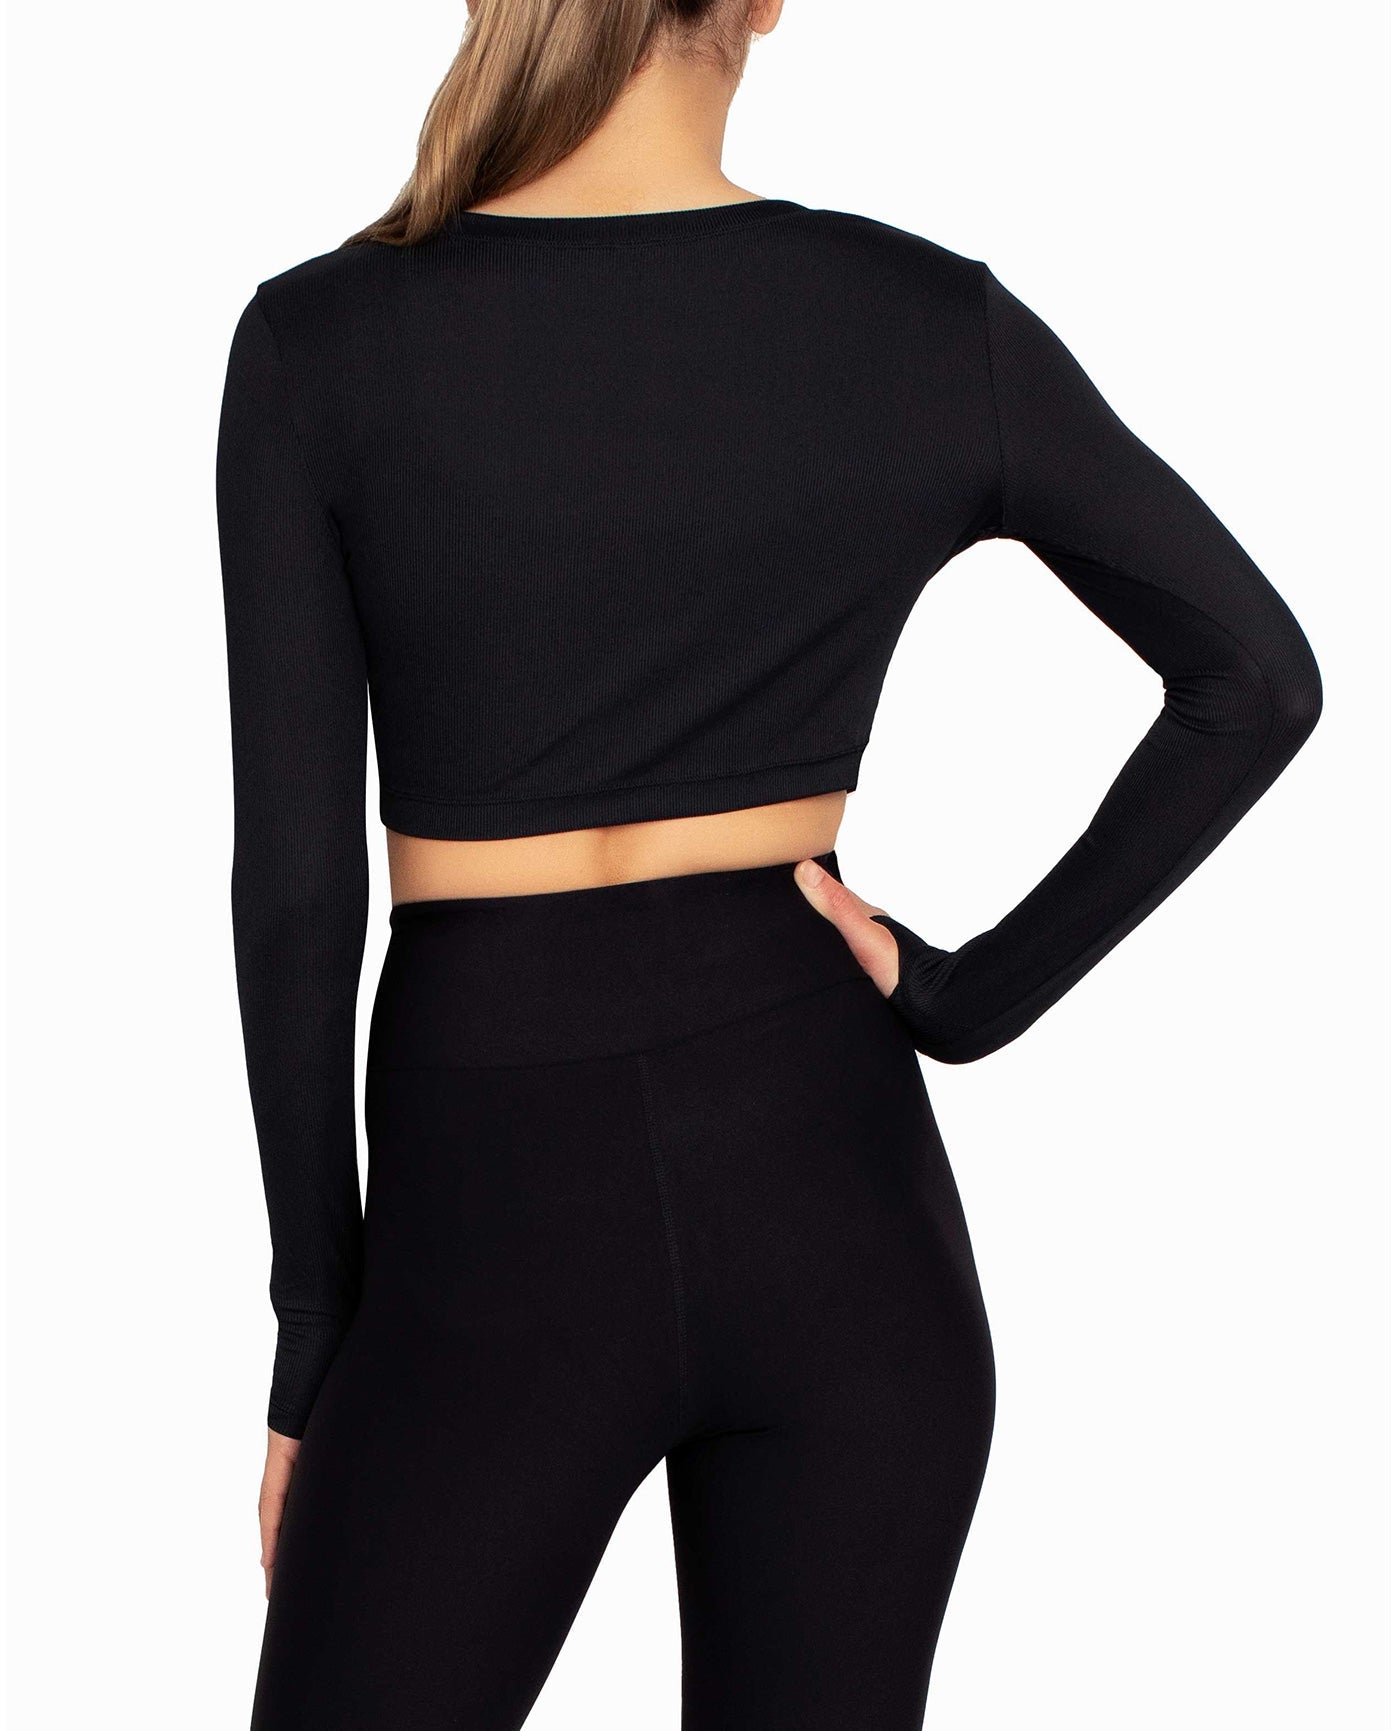 BACK OF CROPPED ACTIVE LONG SLEEVE TOP | JET BLACK